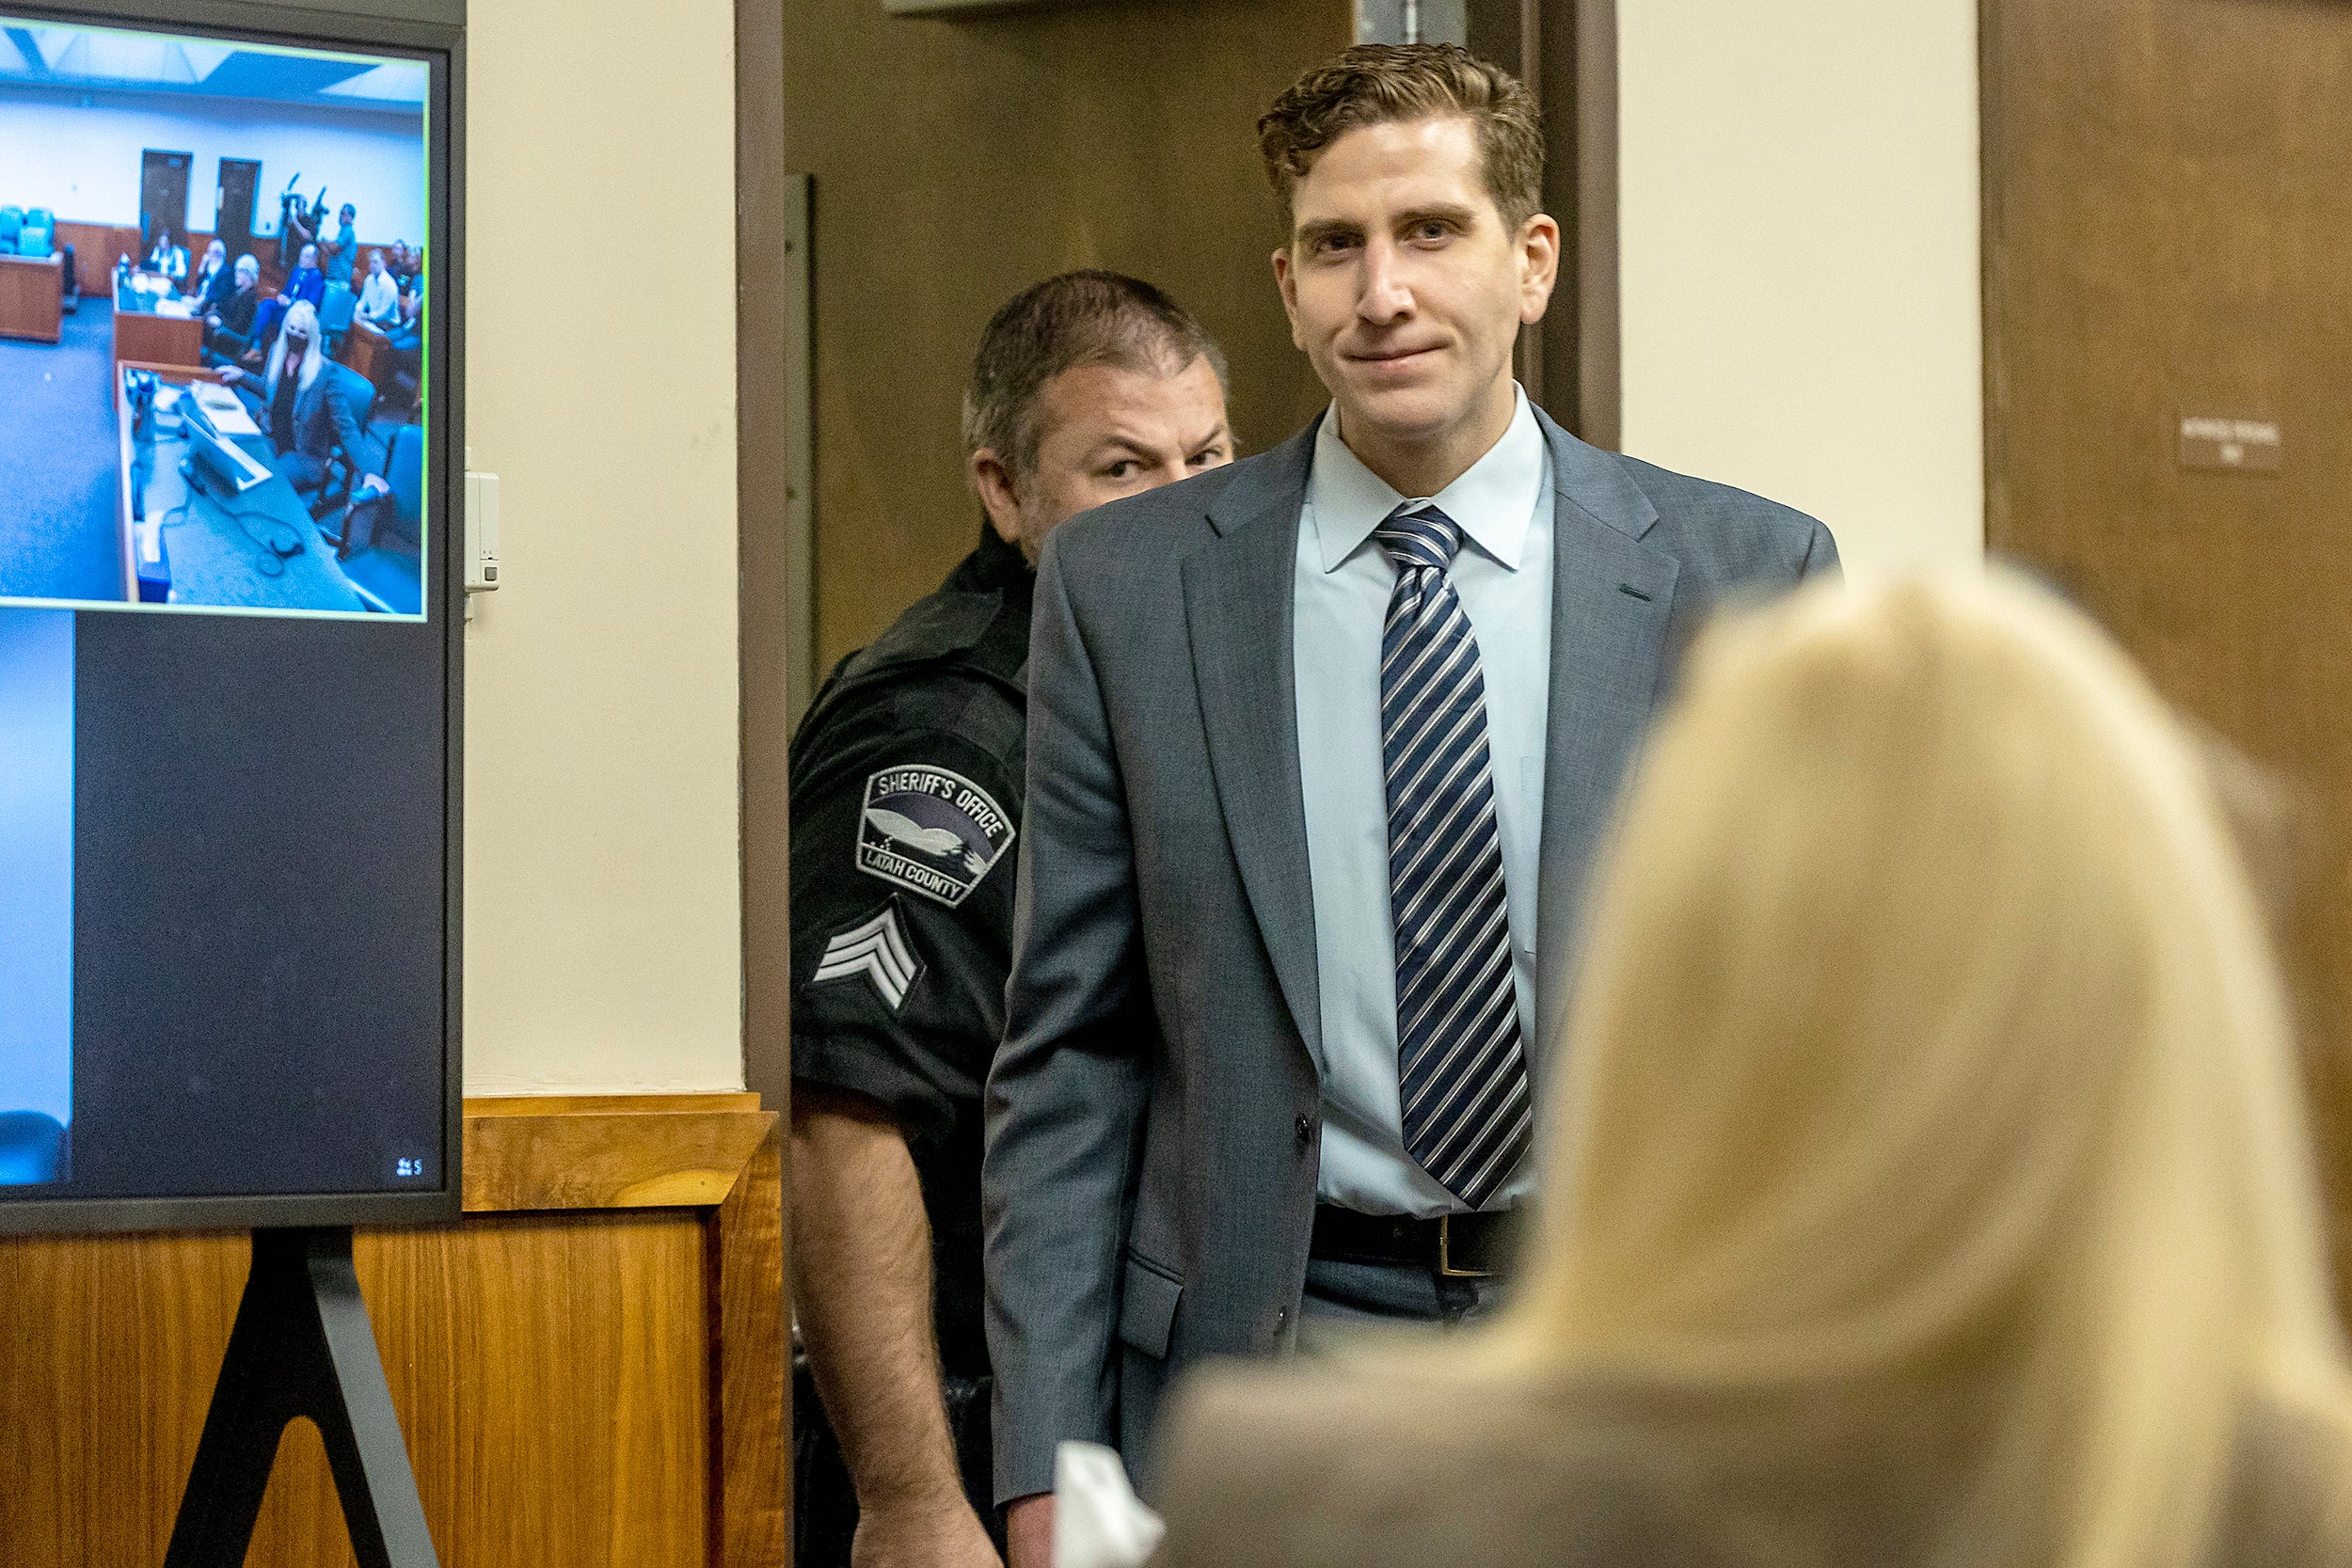 Bryan Kohberger enters the courtroom for a hearing on 18 August at the Latah County Courthouse in Moscow, Idaho